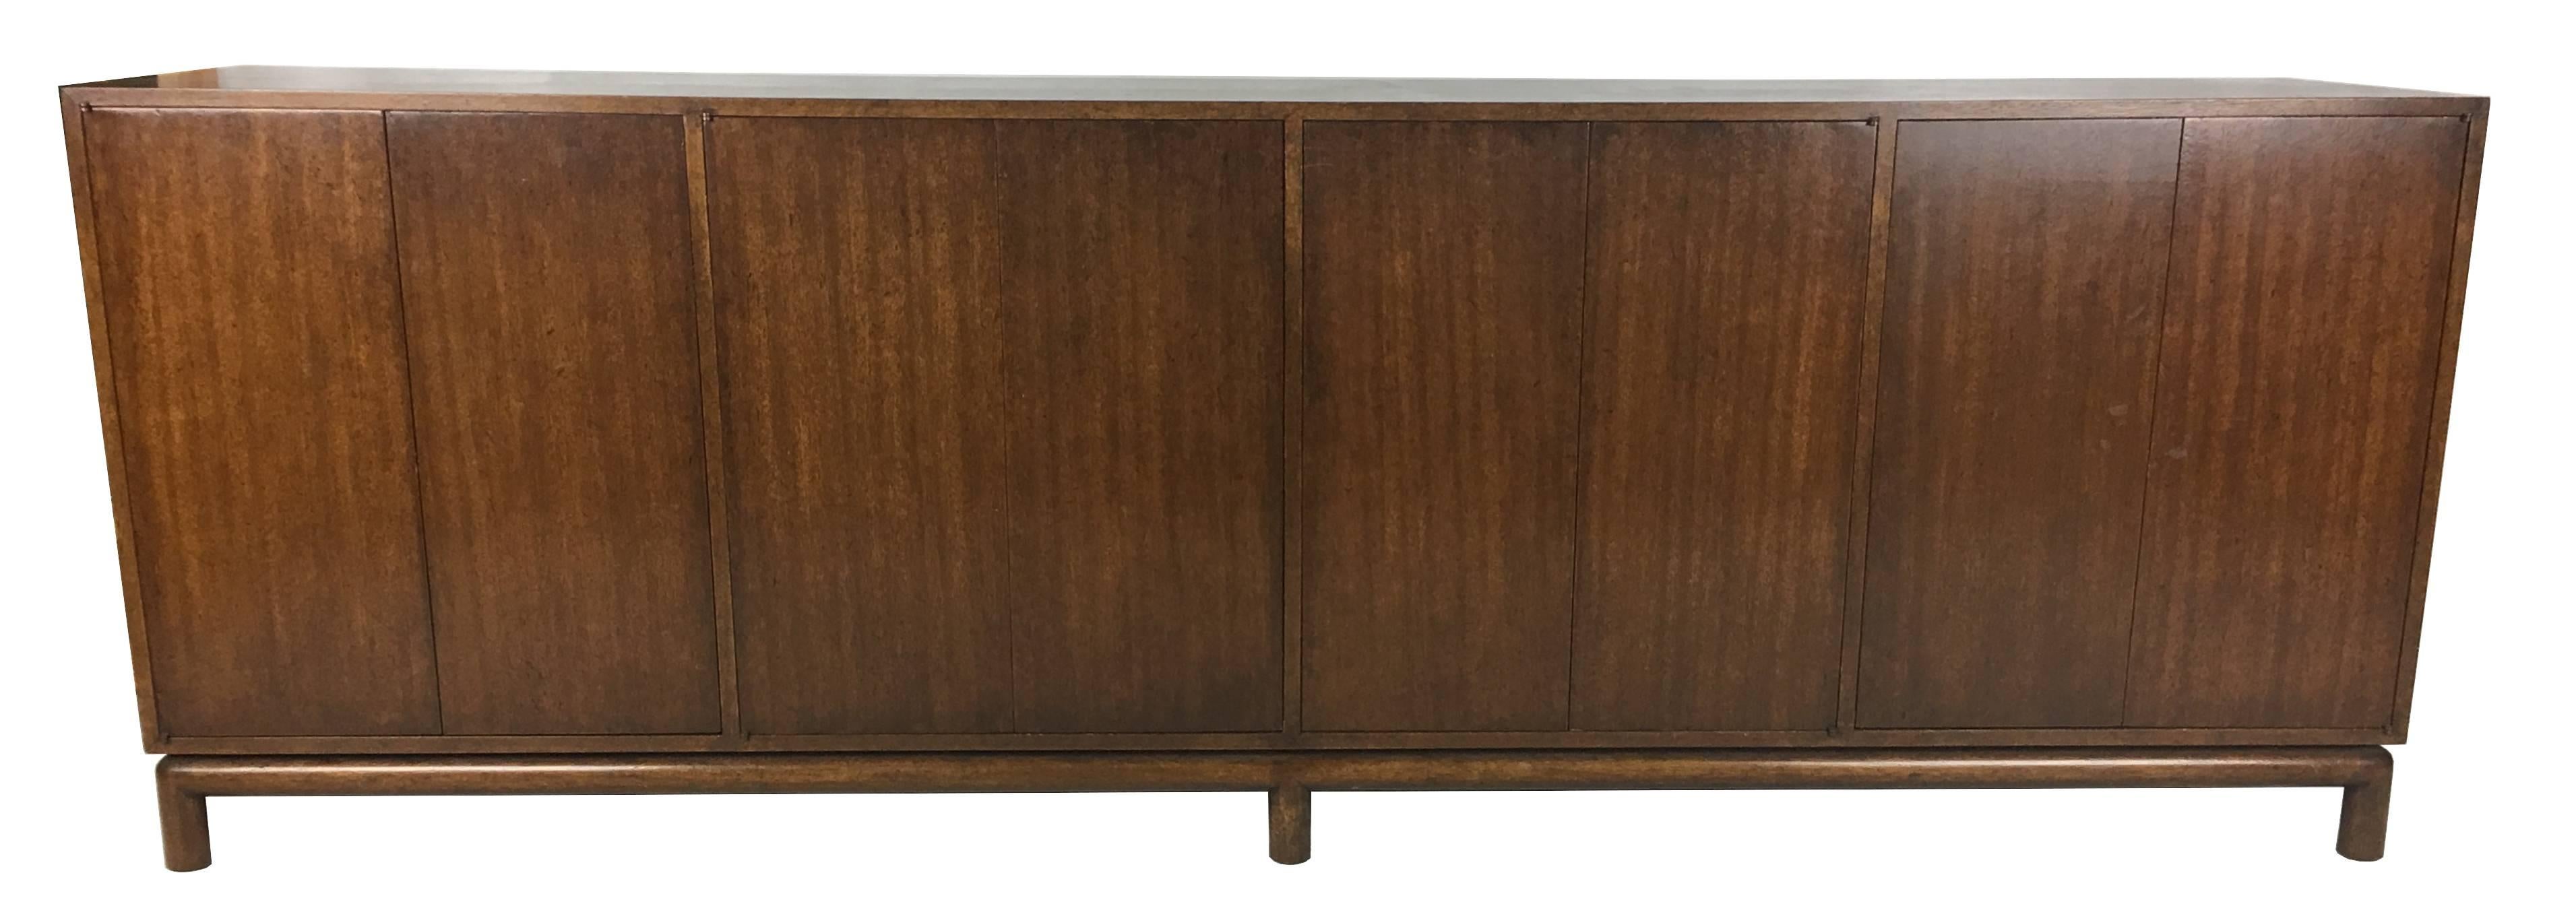 Beautifully crafted Mahogany Sideboard raised on a dowel-legged base. This thin-edged piece has four bi-fold door compartments; two are fitted with drawers and felt lined silver storage and the remaining two are fitted with two adjustable shelves